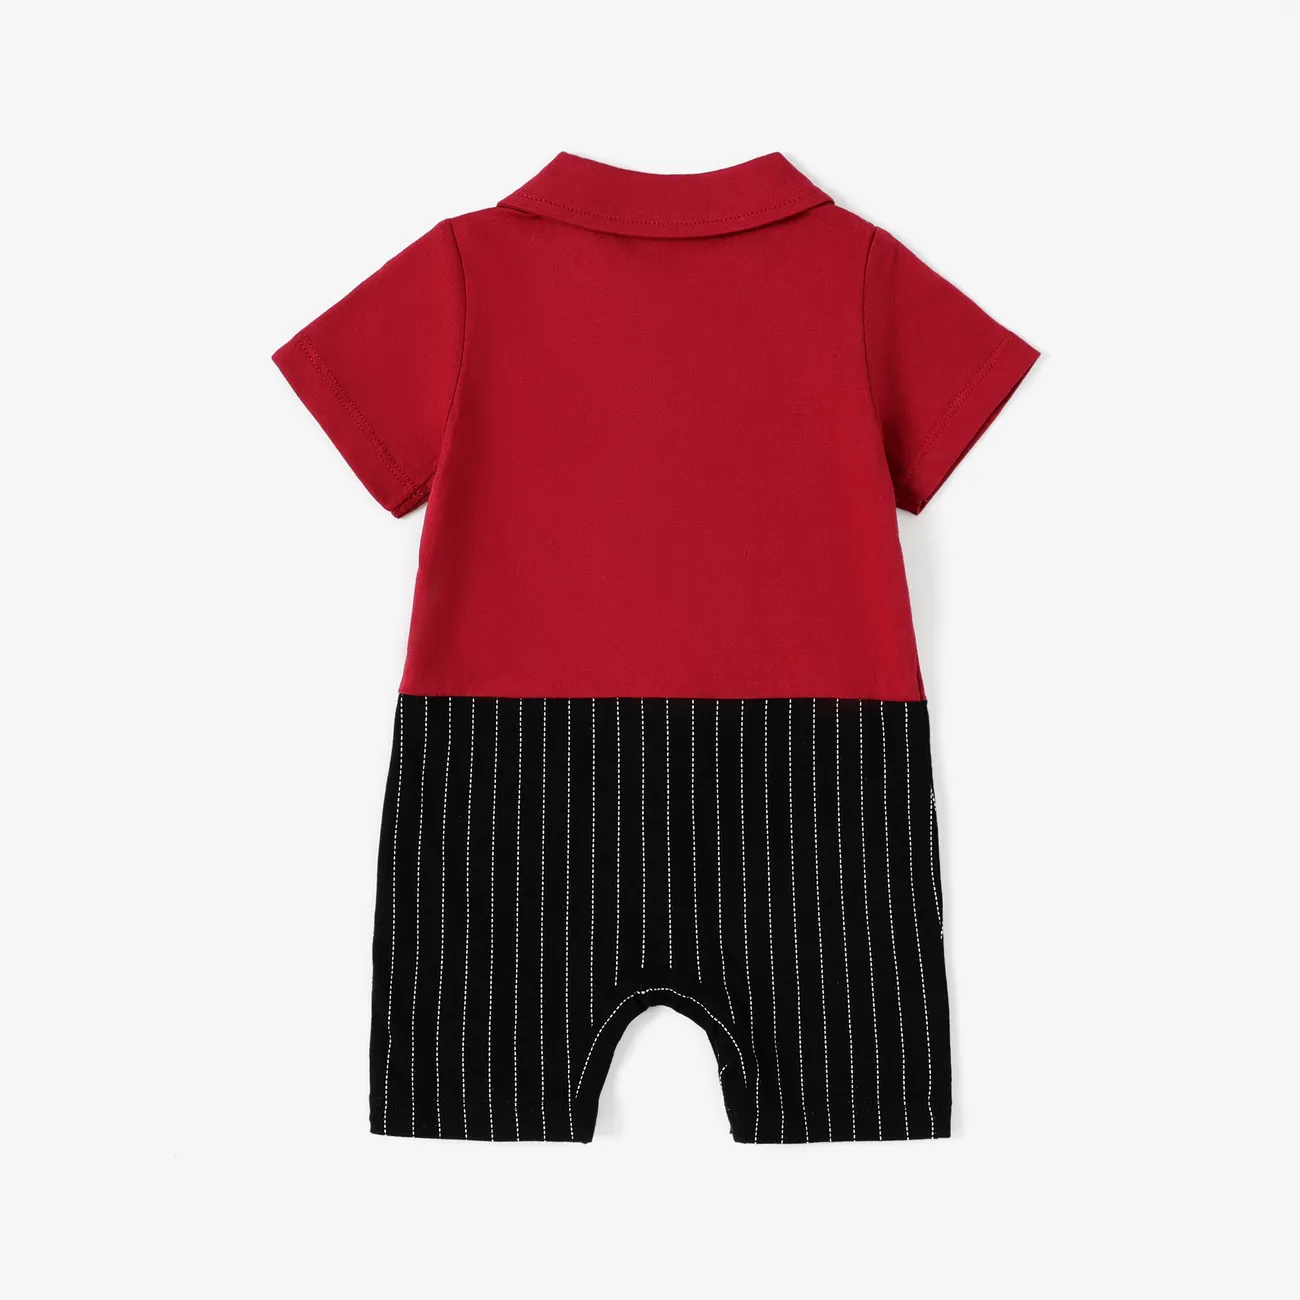 Baby Boy Casual Cotton Stitched Fabric Short Sleeve Jumpsuit Red big image 1